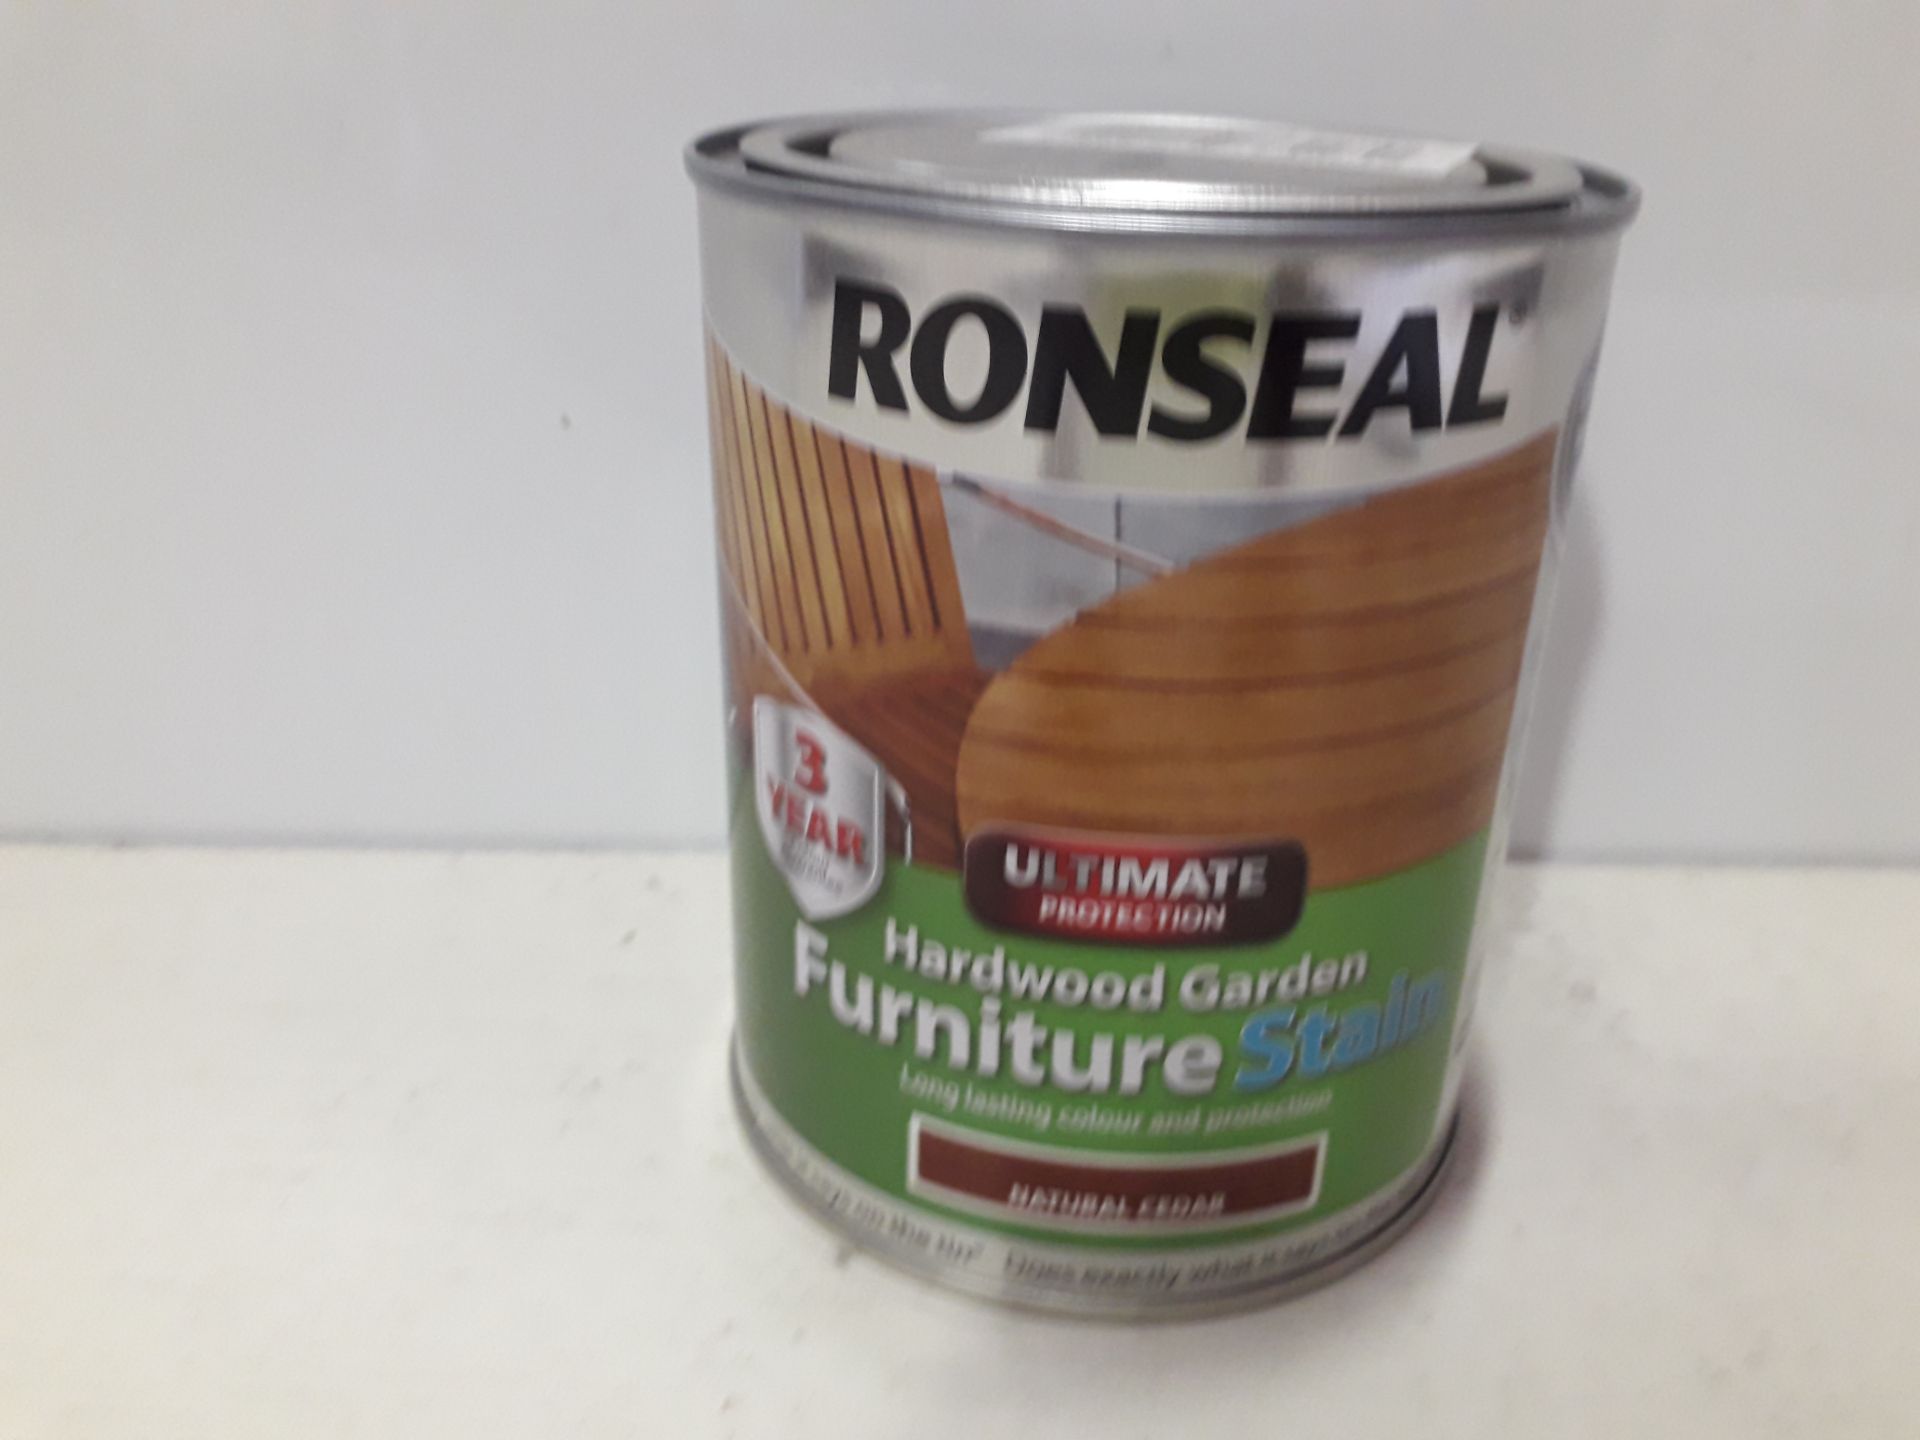 30 X RONSEAL LOT TO INCLUDE HARD WOOD GARDEN FURNITURE STAIN ( NATURAL CEDAR ) AND DIAMOND HARD